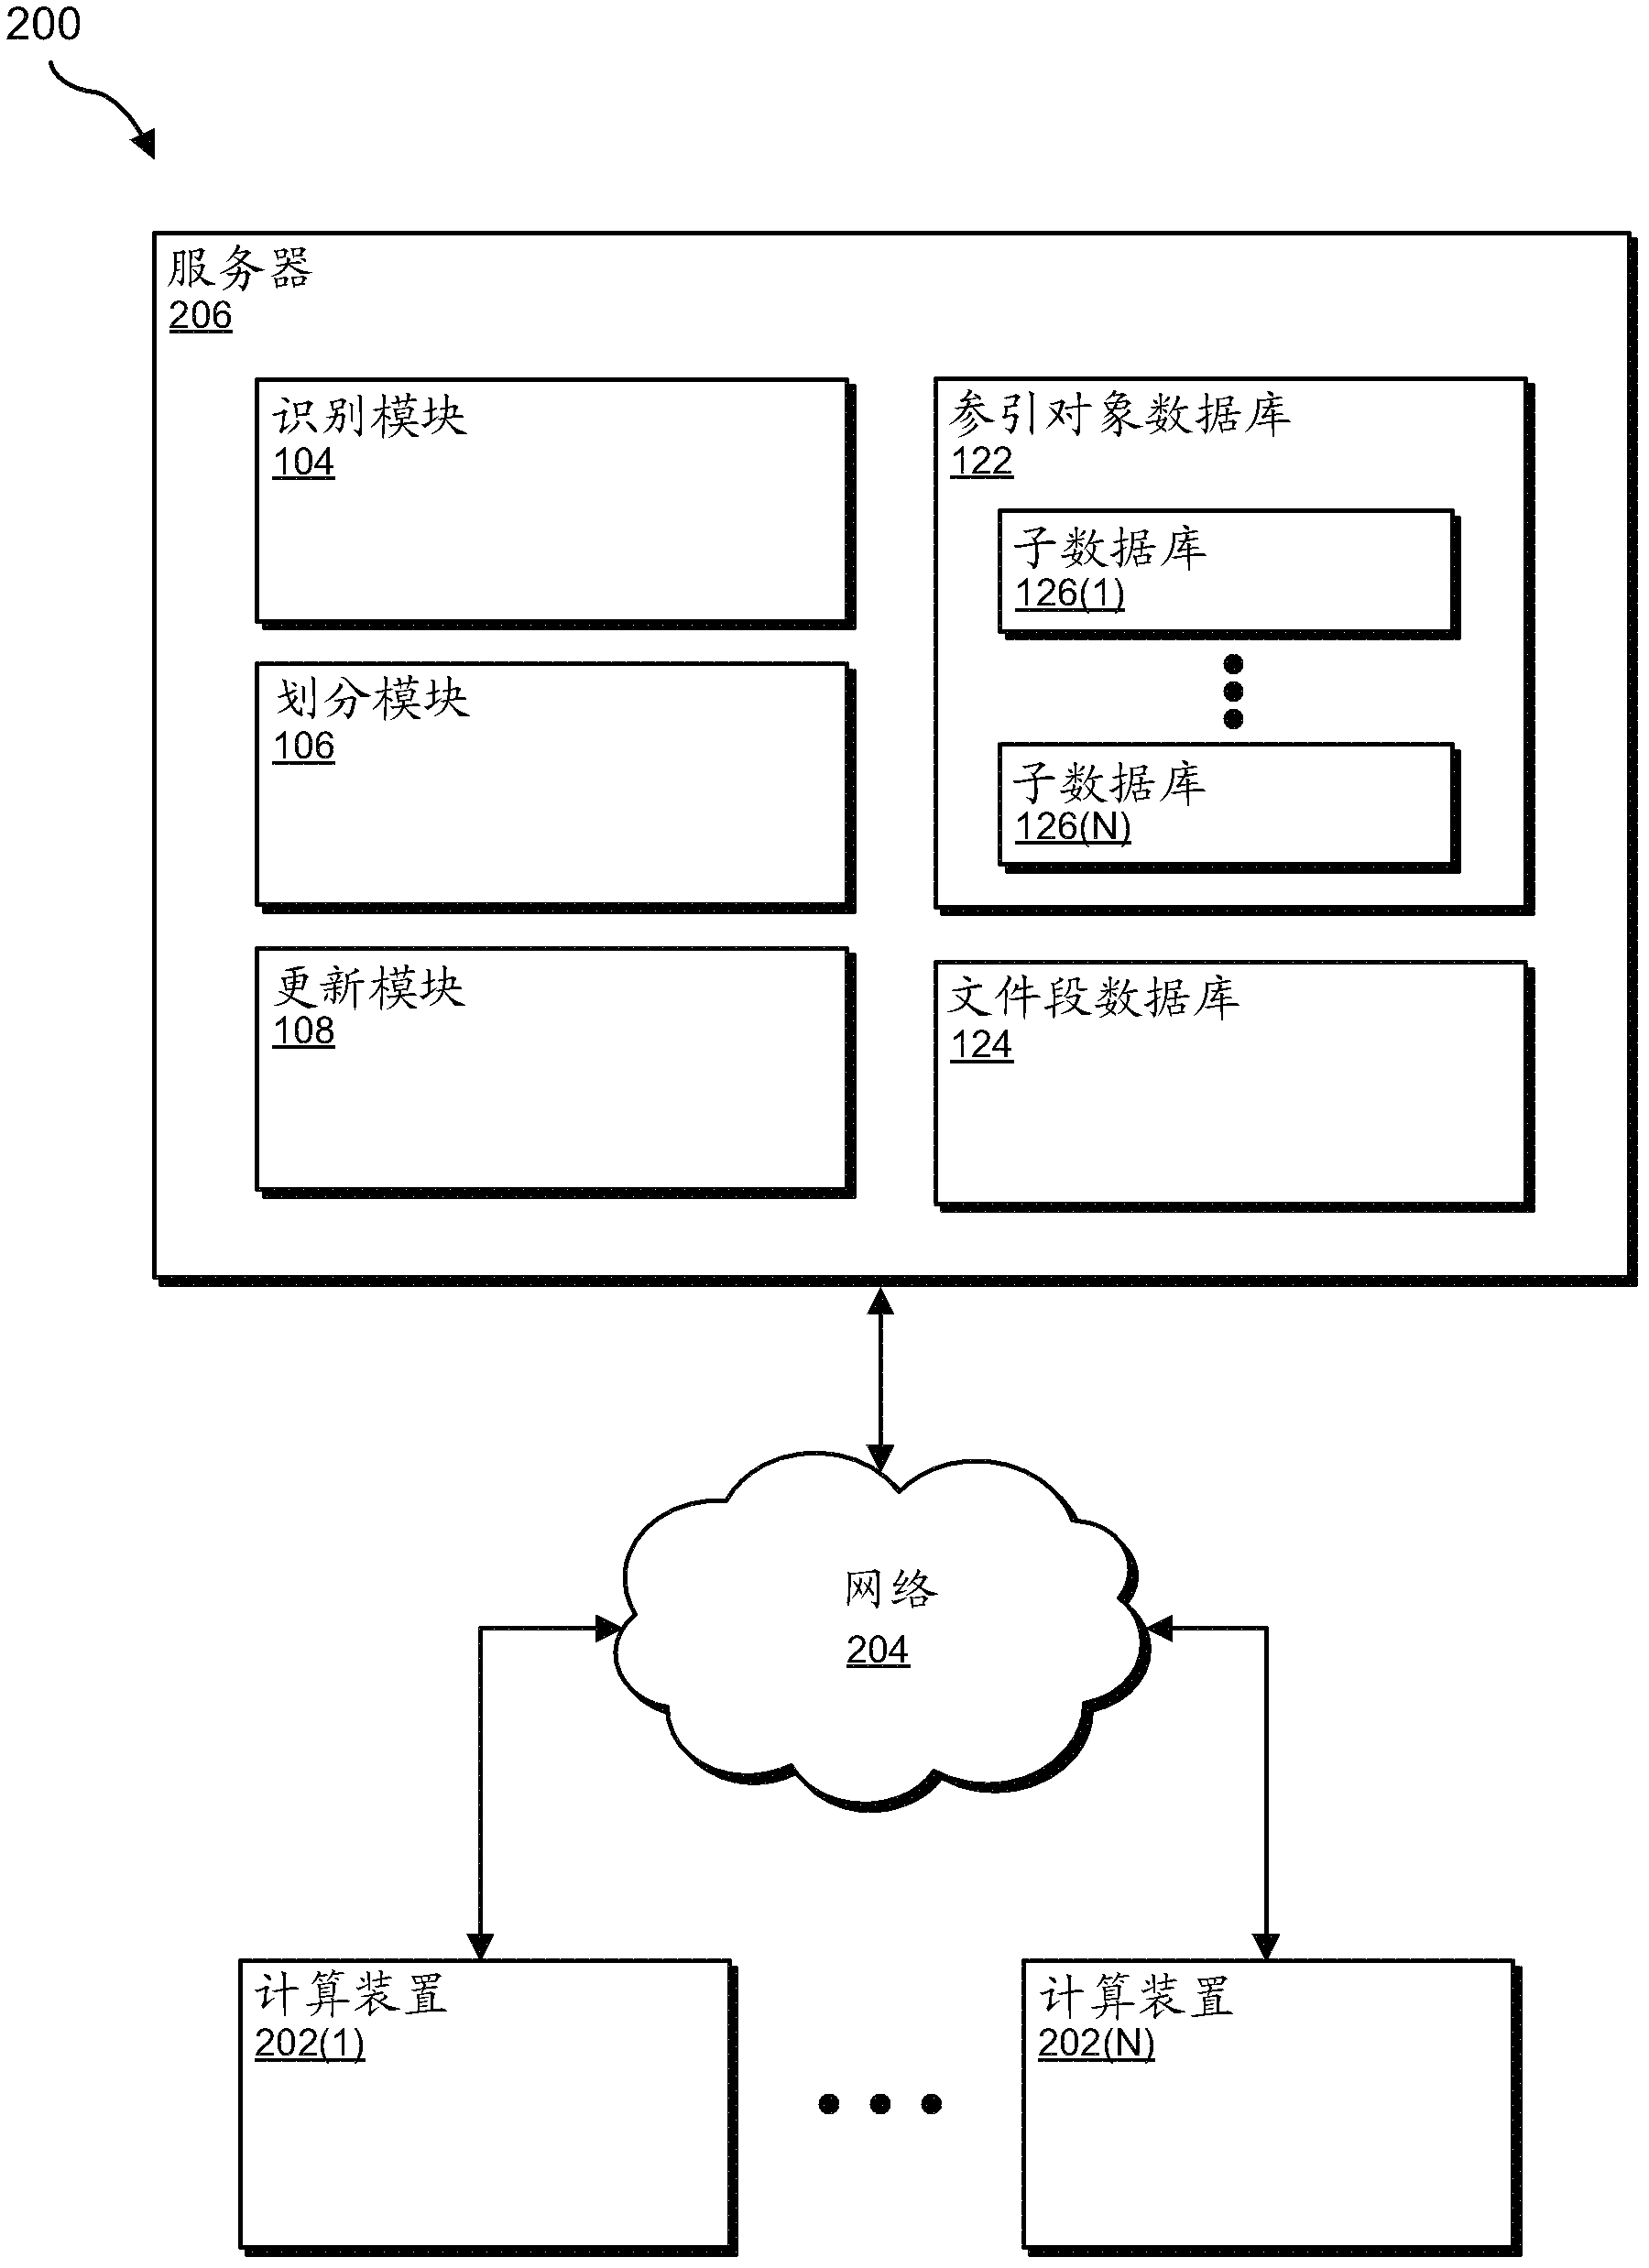 Systems and methods for providing increased scalability in deduplication storage systems